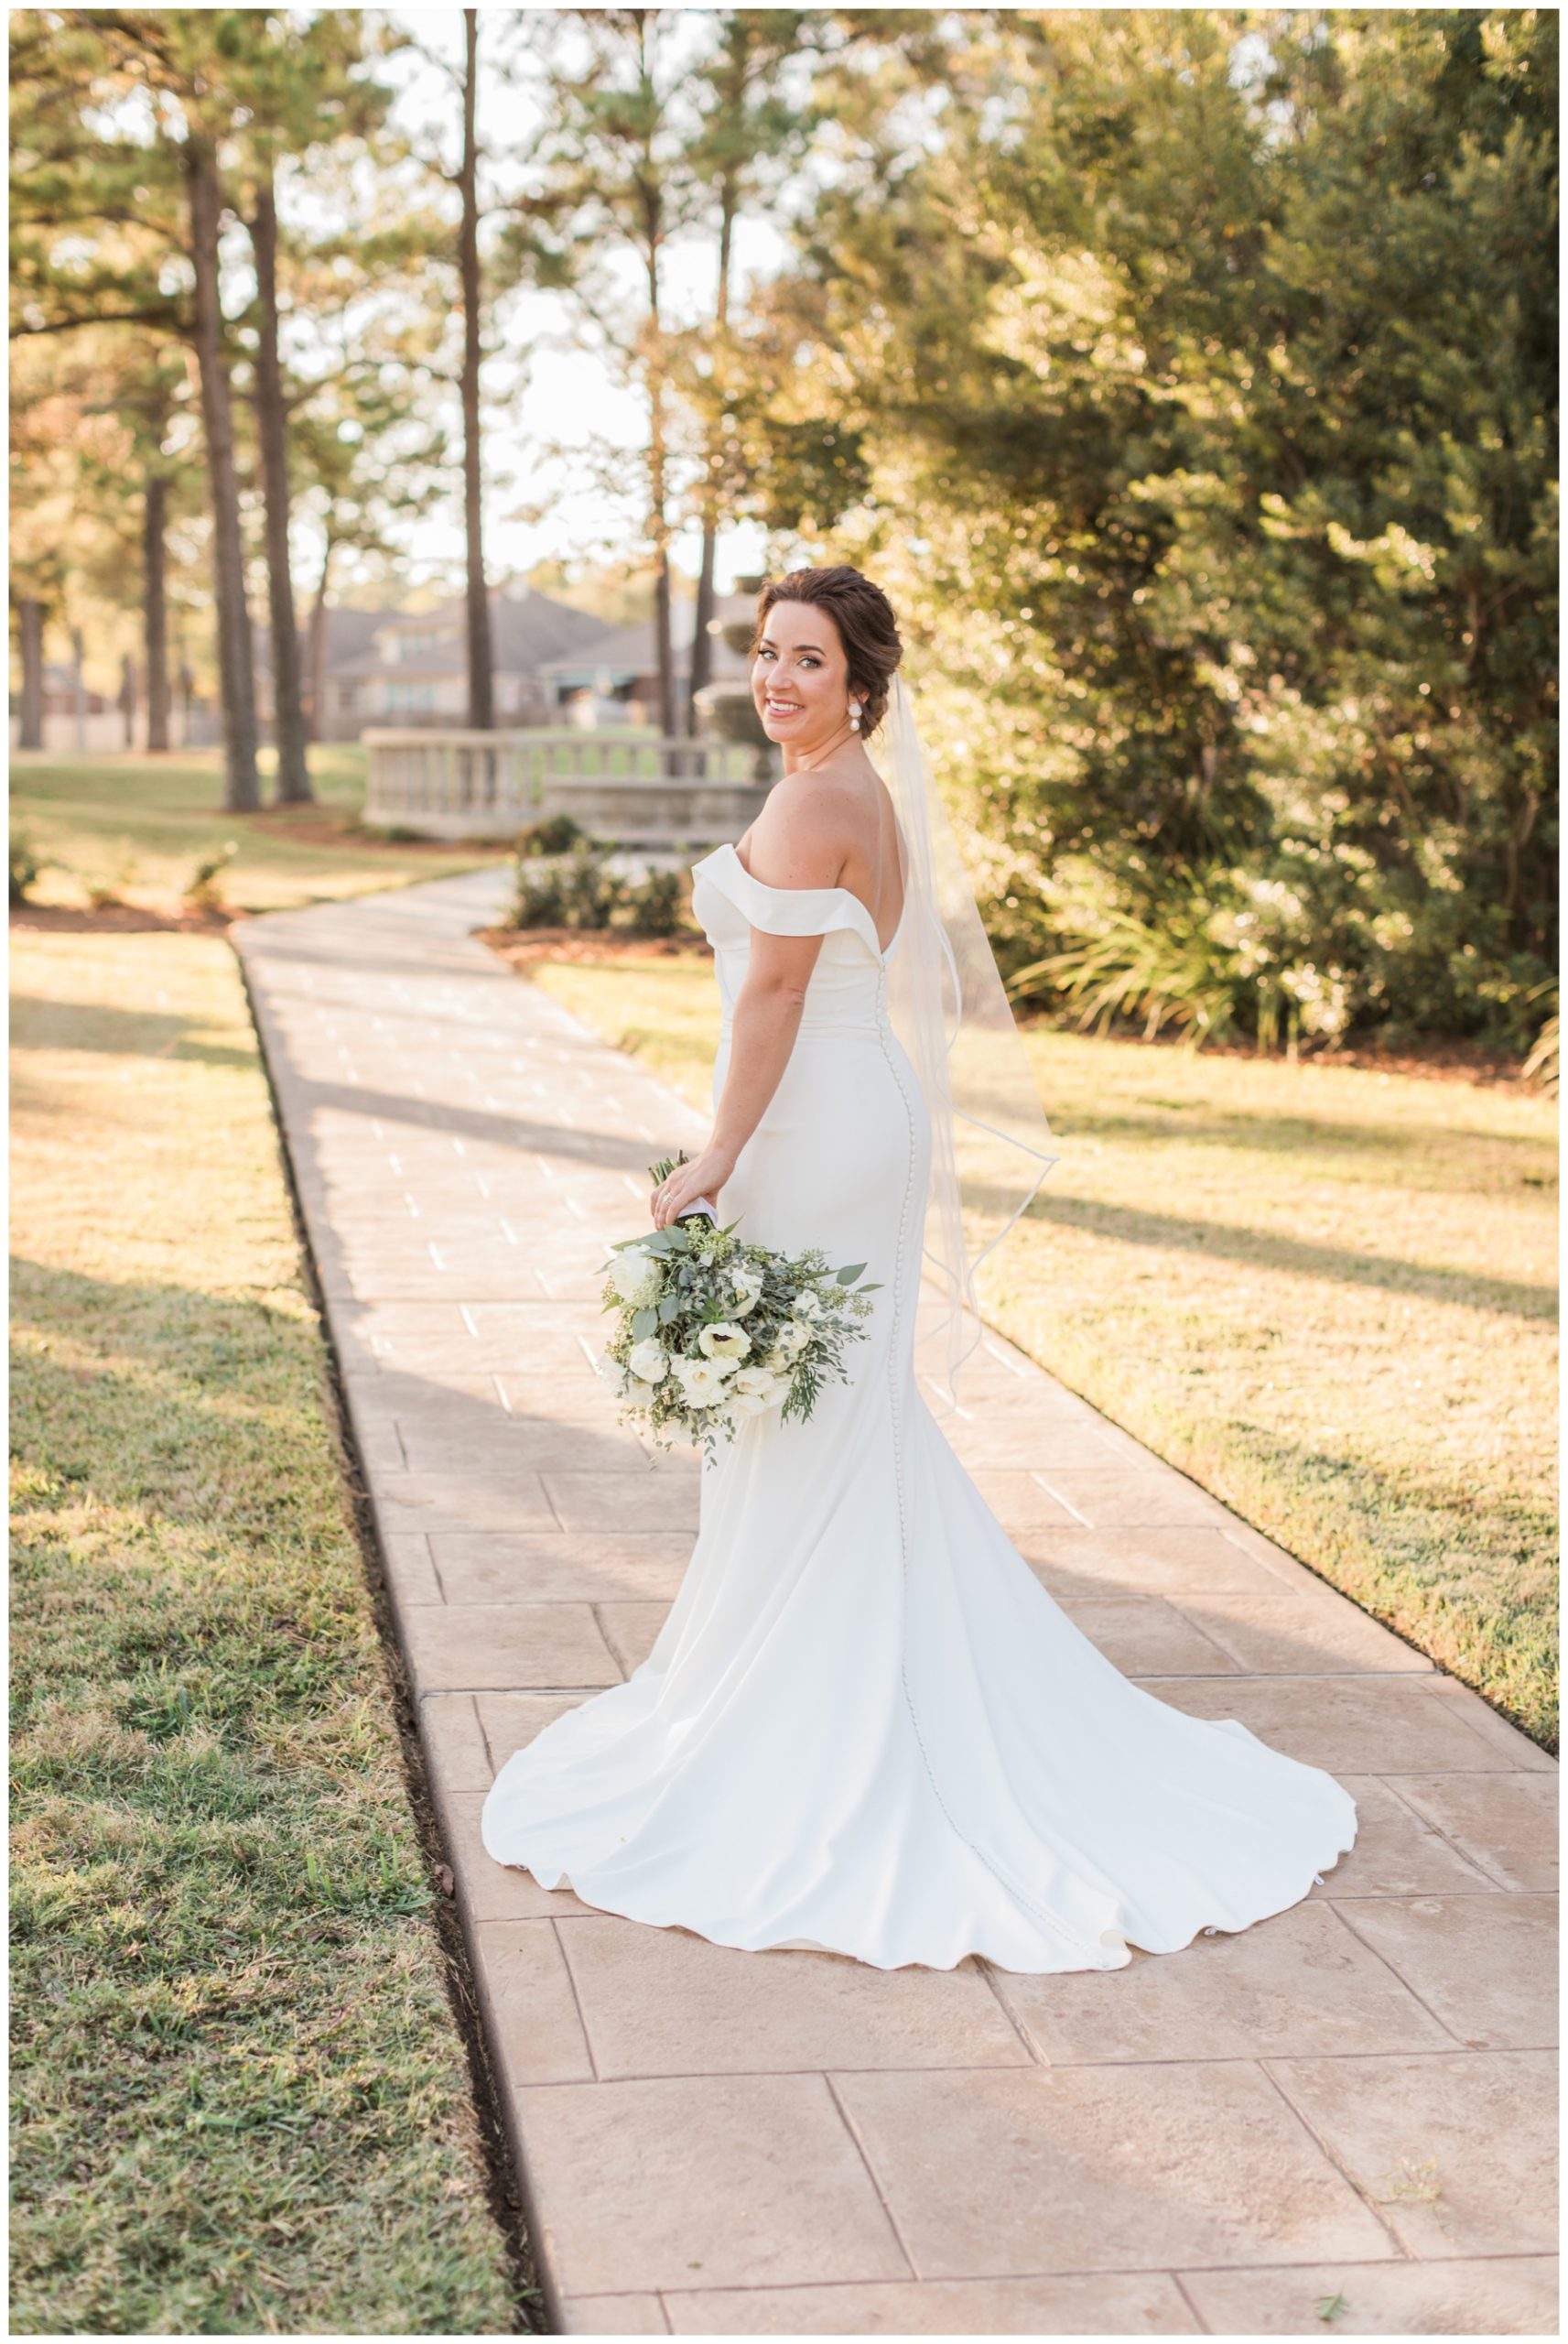 Bridal portraits at Bentwater Yacht Club